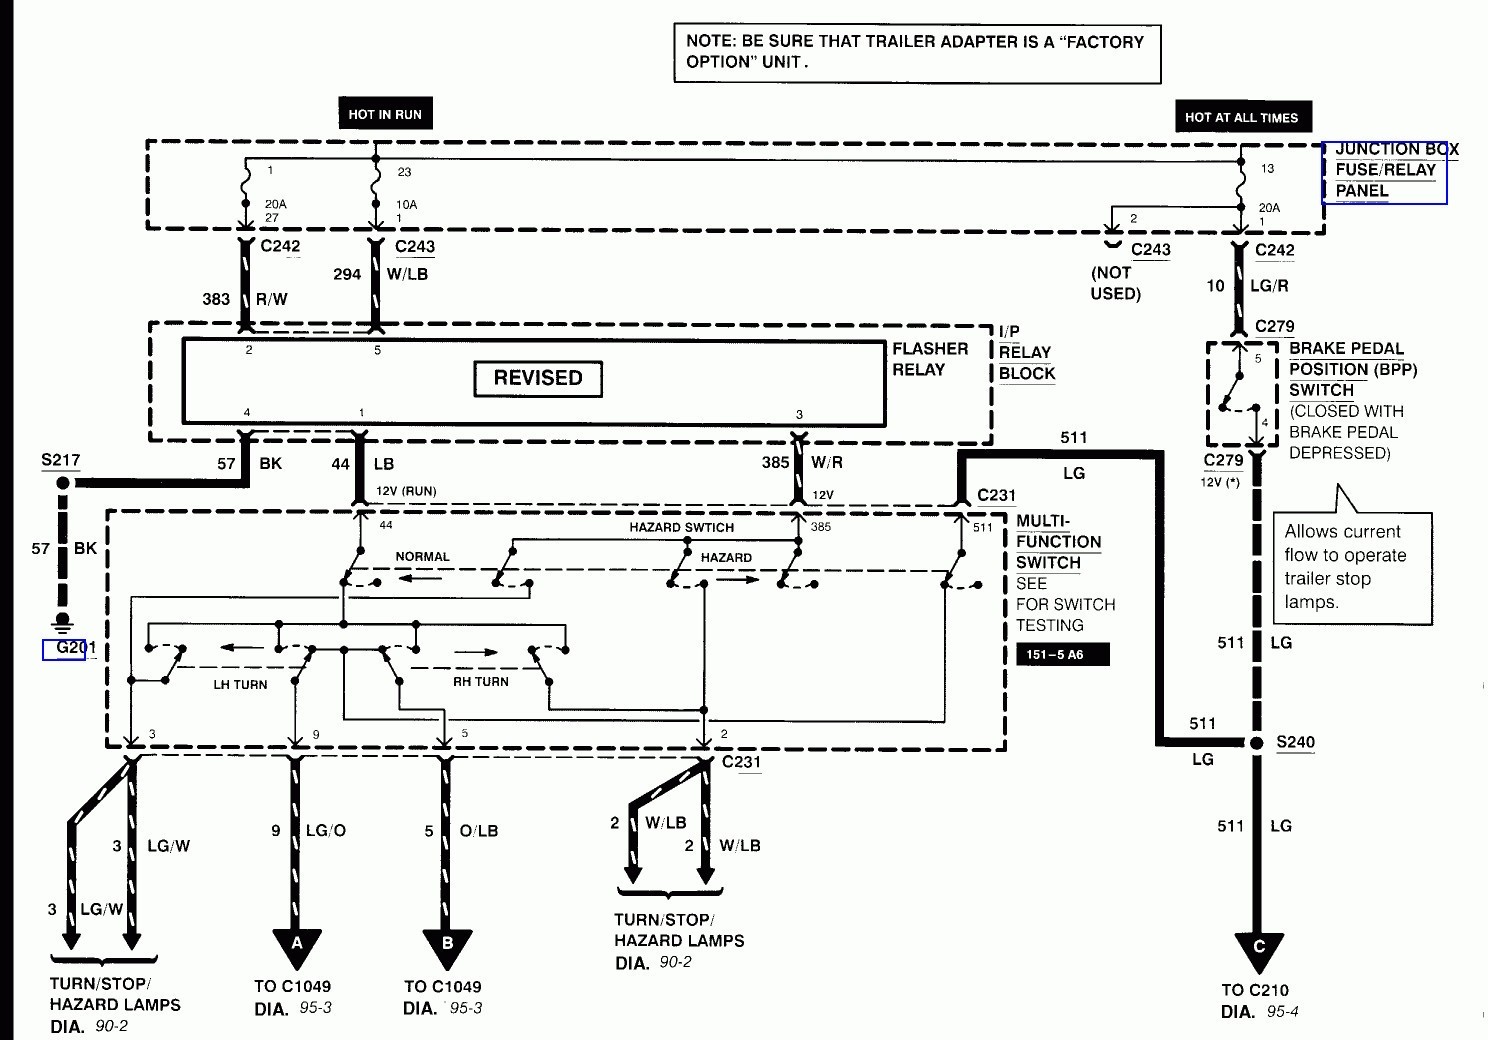 2000 ford F250 Ignition Wiring Diagram 2000 ford F 250 Alternator Wiring Diagram Of 2000 ford F250 Ignition Wiring Diagram